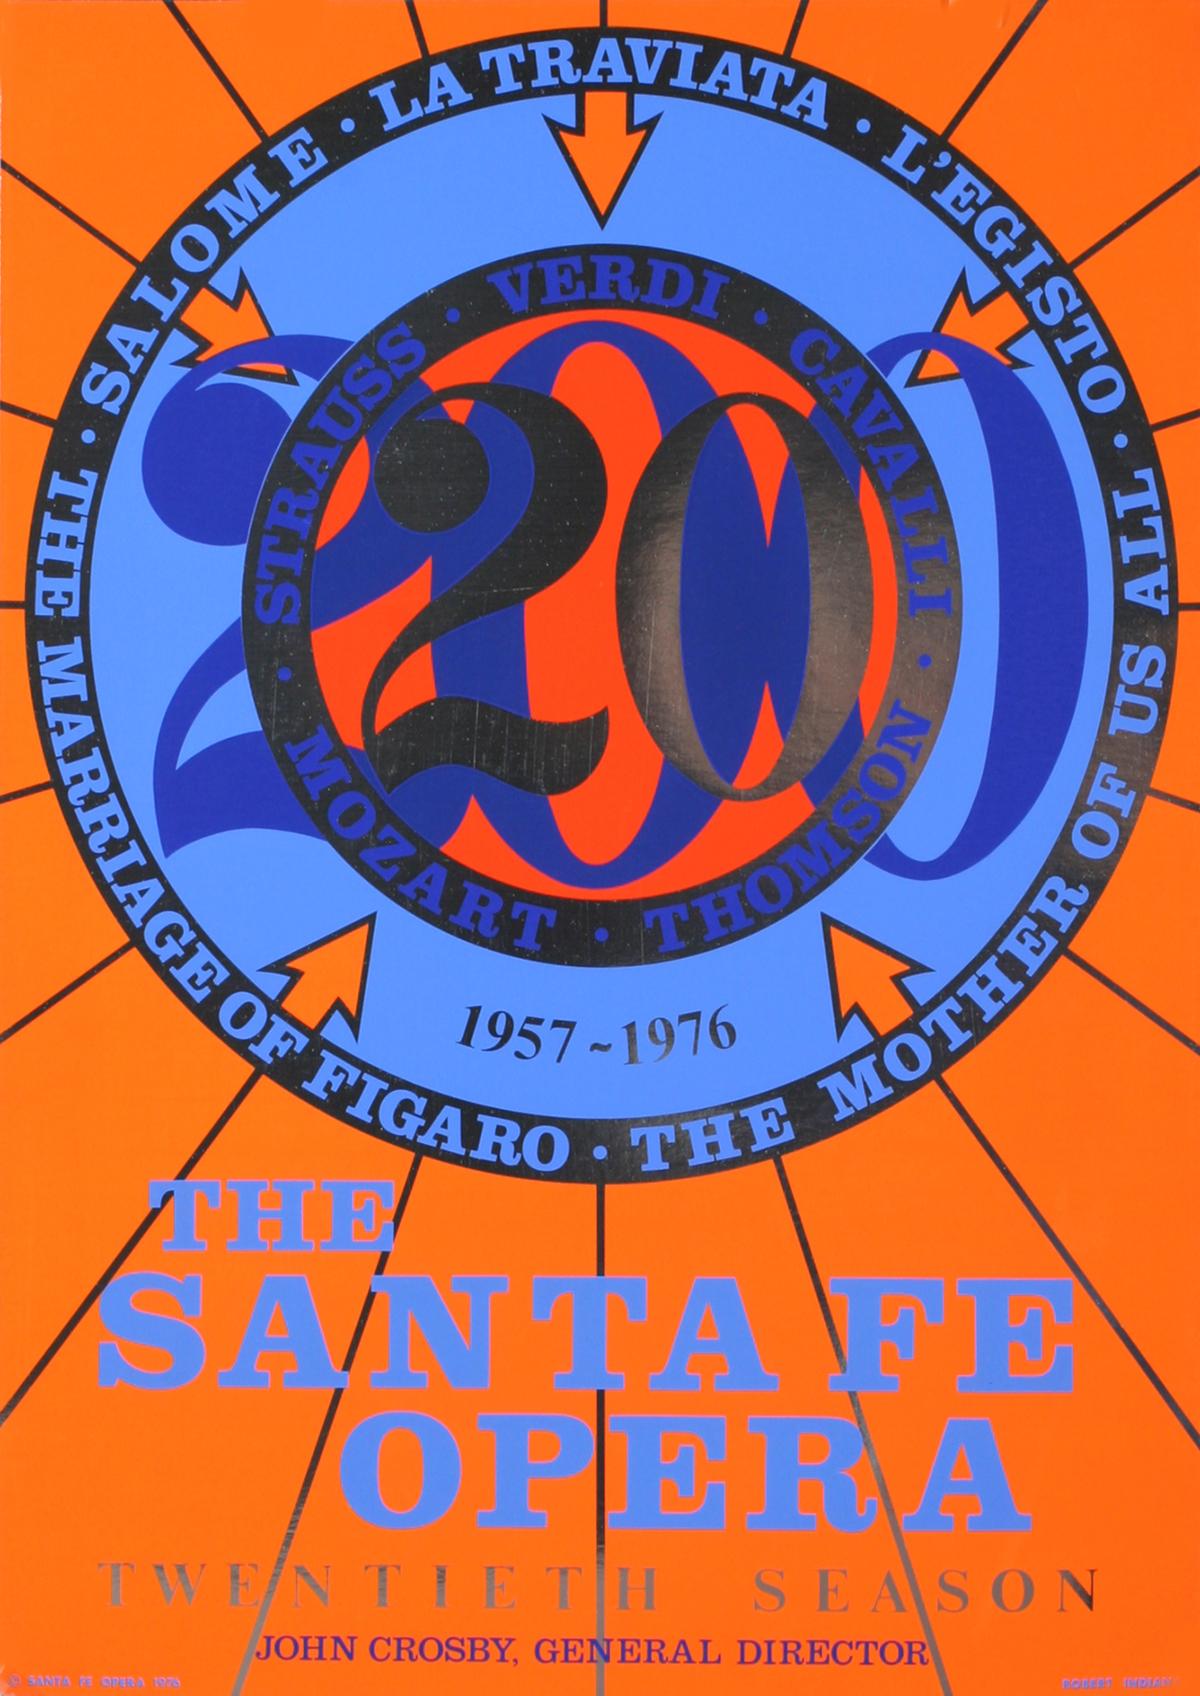 First edition exhibition poster designed and created by Robert Indiana for the Santa Fe Opera in 1976, celebrating twenty years (1957-1976) of performances. Silk-screen on thick paper, published by List Art posters. 